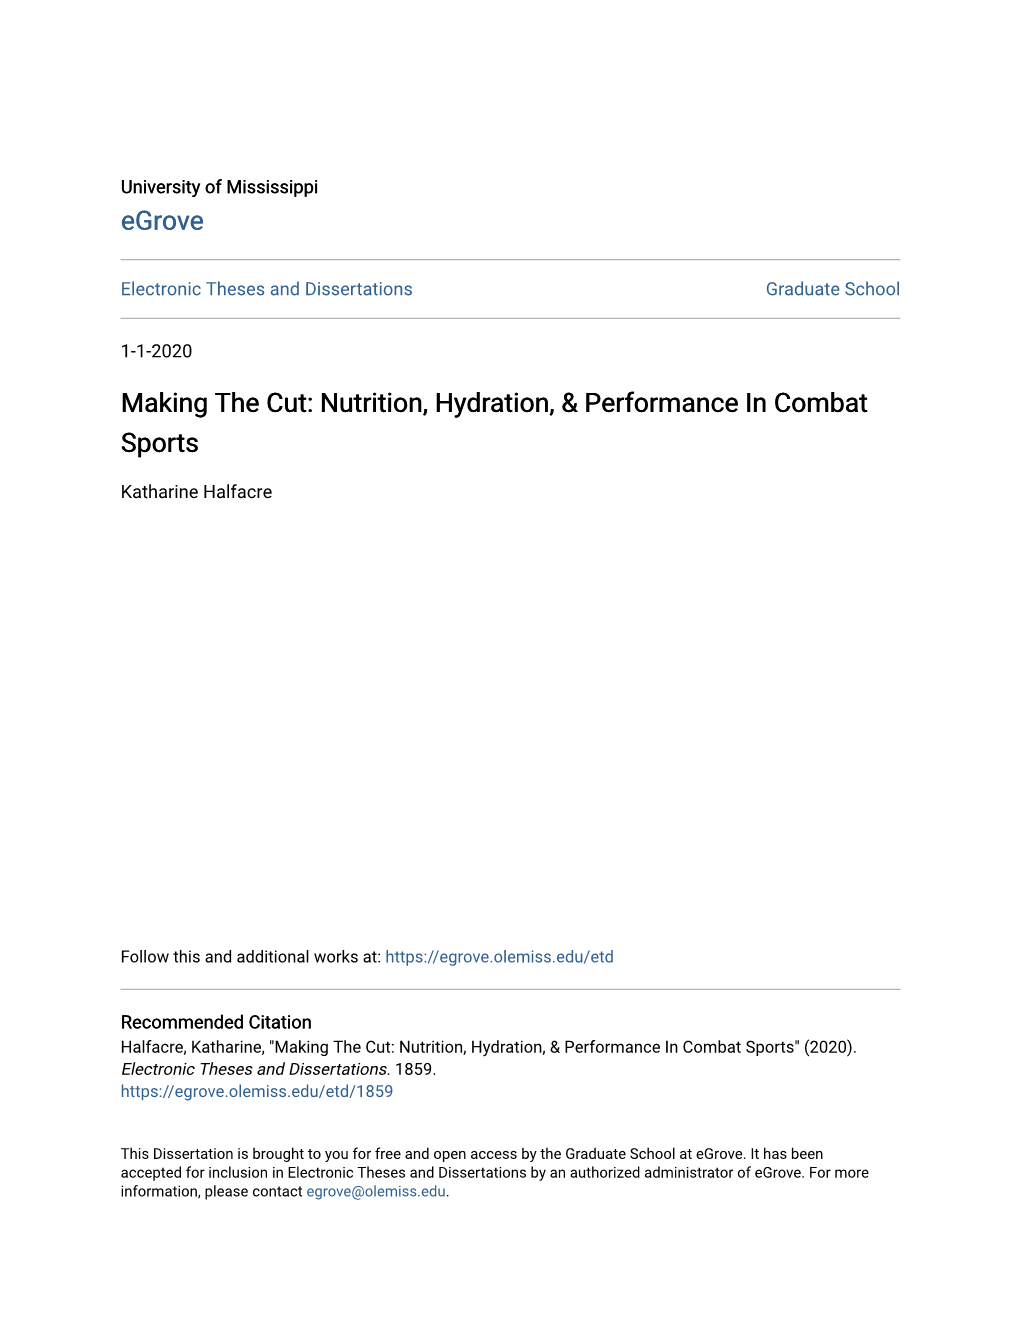 Nutrition, Hydration, & Performance in Combat Sports